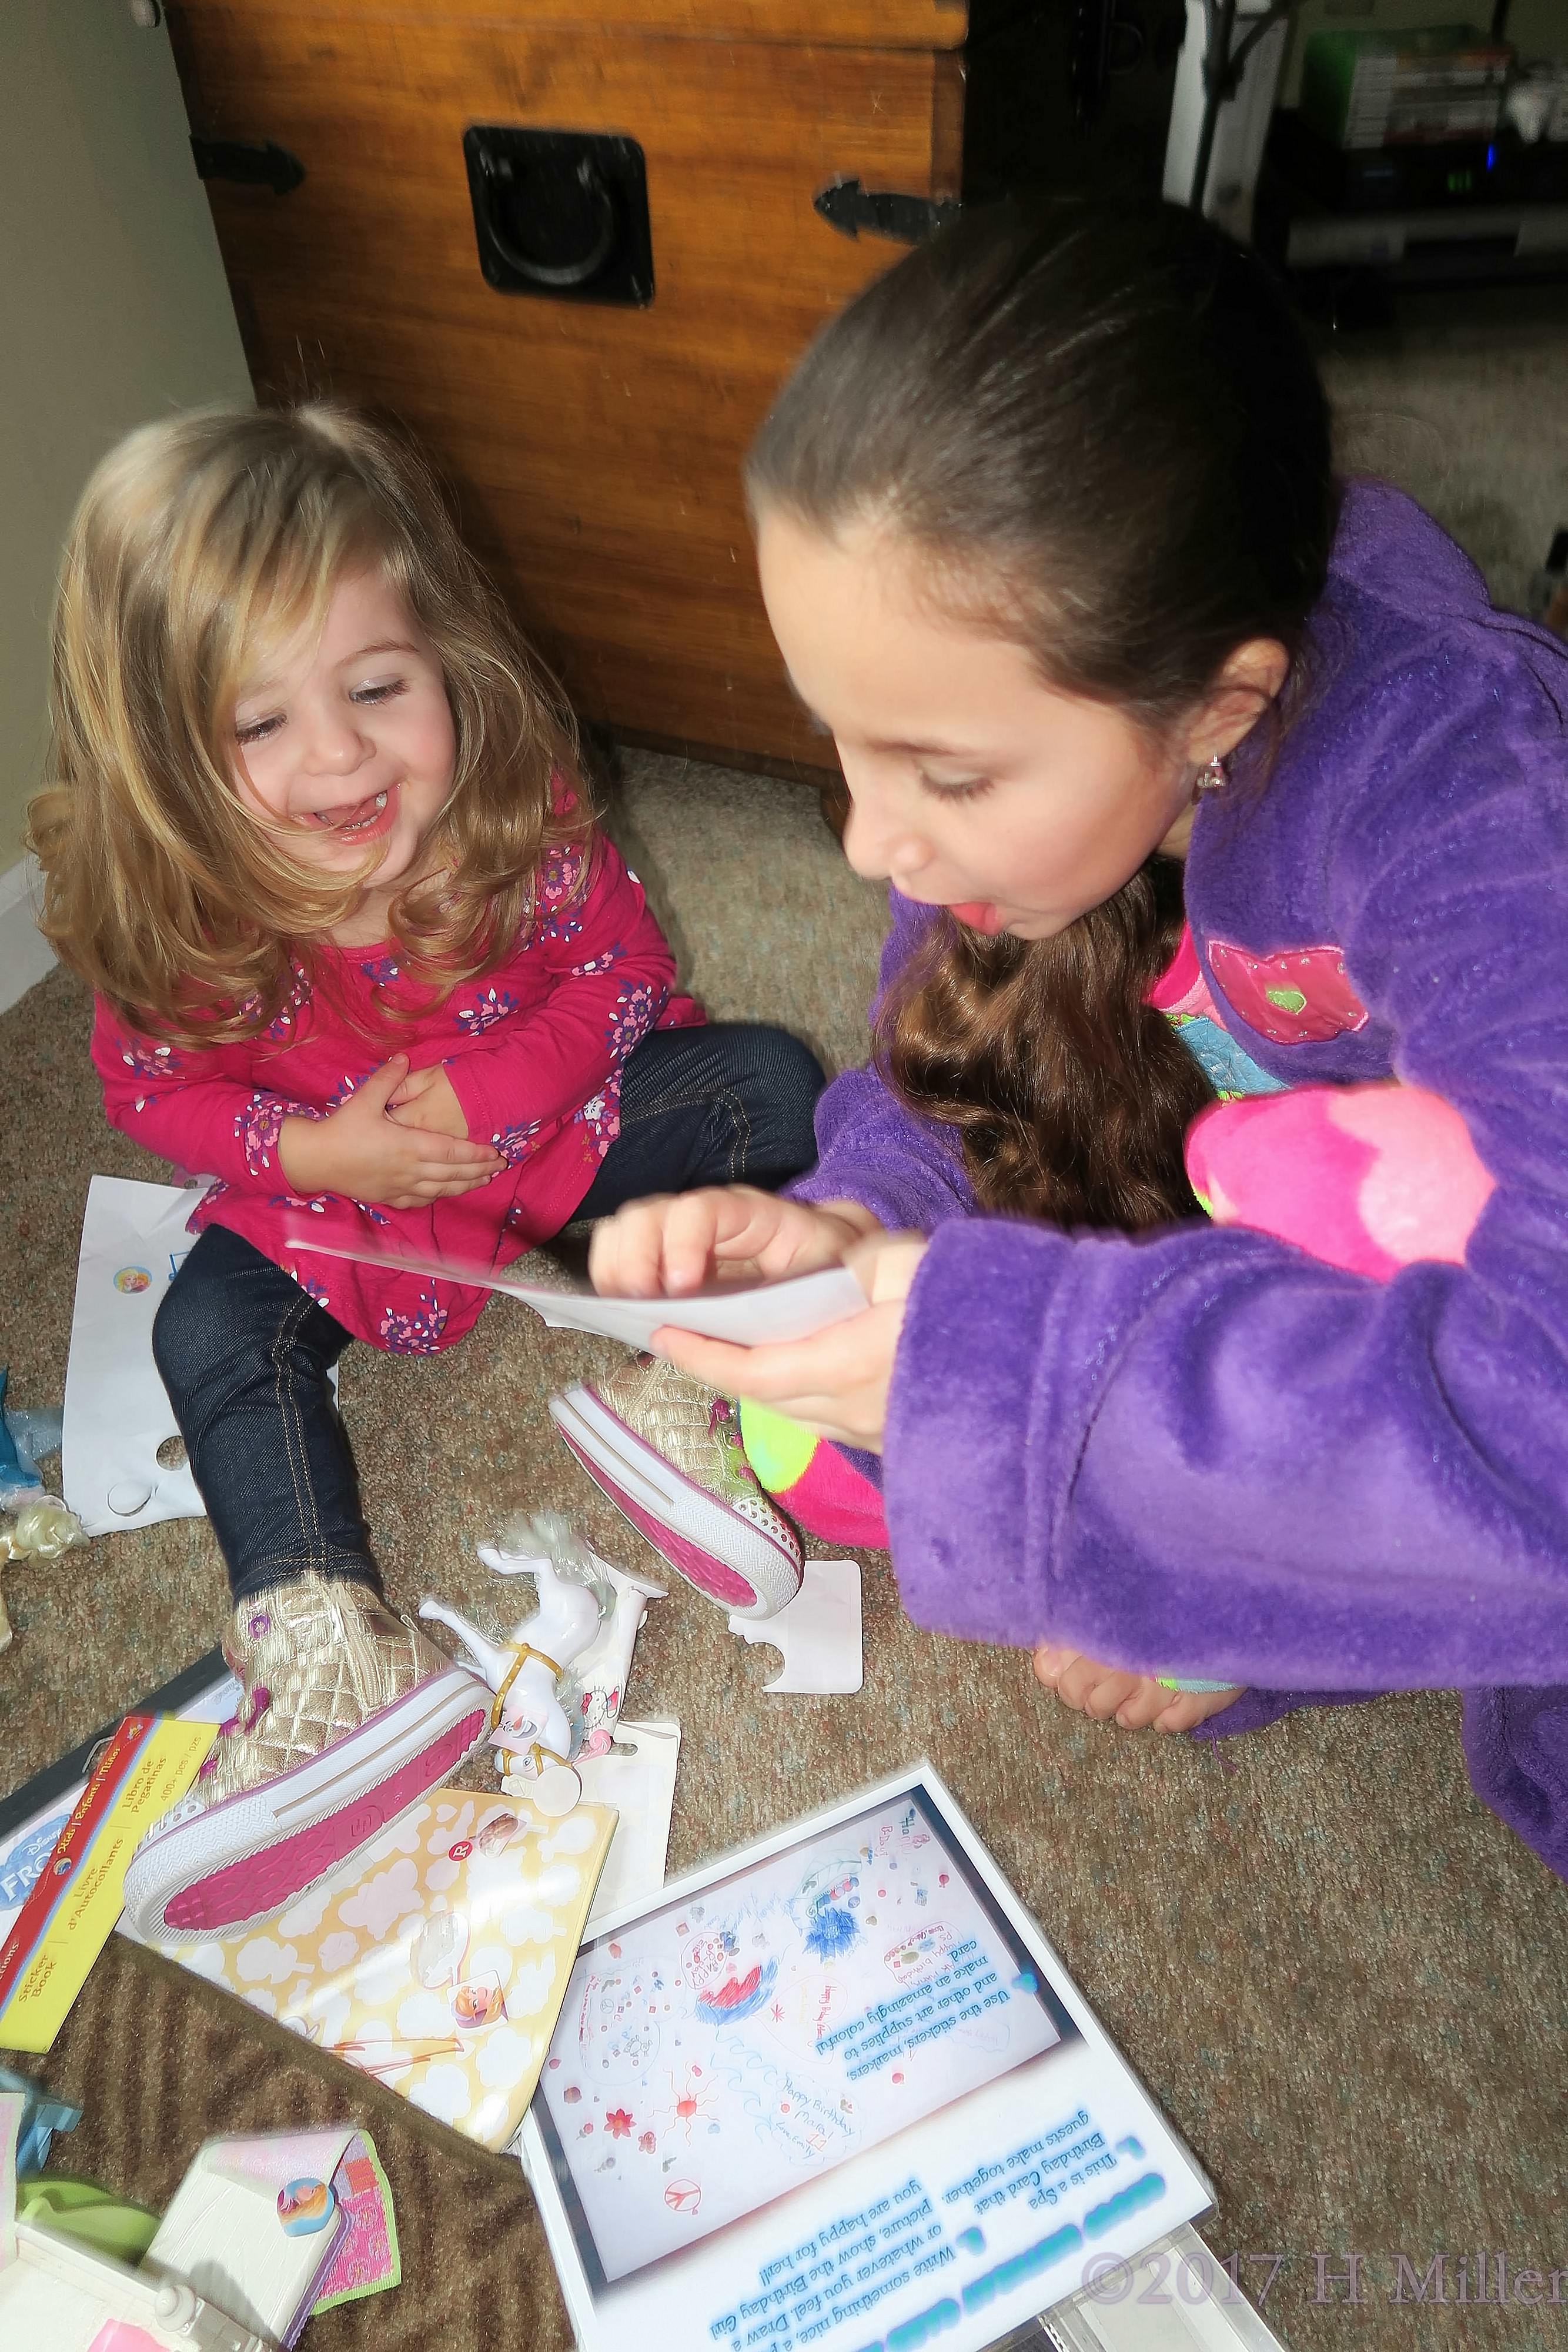 Girls Are Really Excited About These Kids Craft Projects. 4